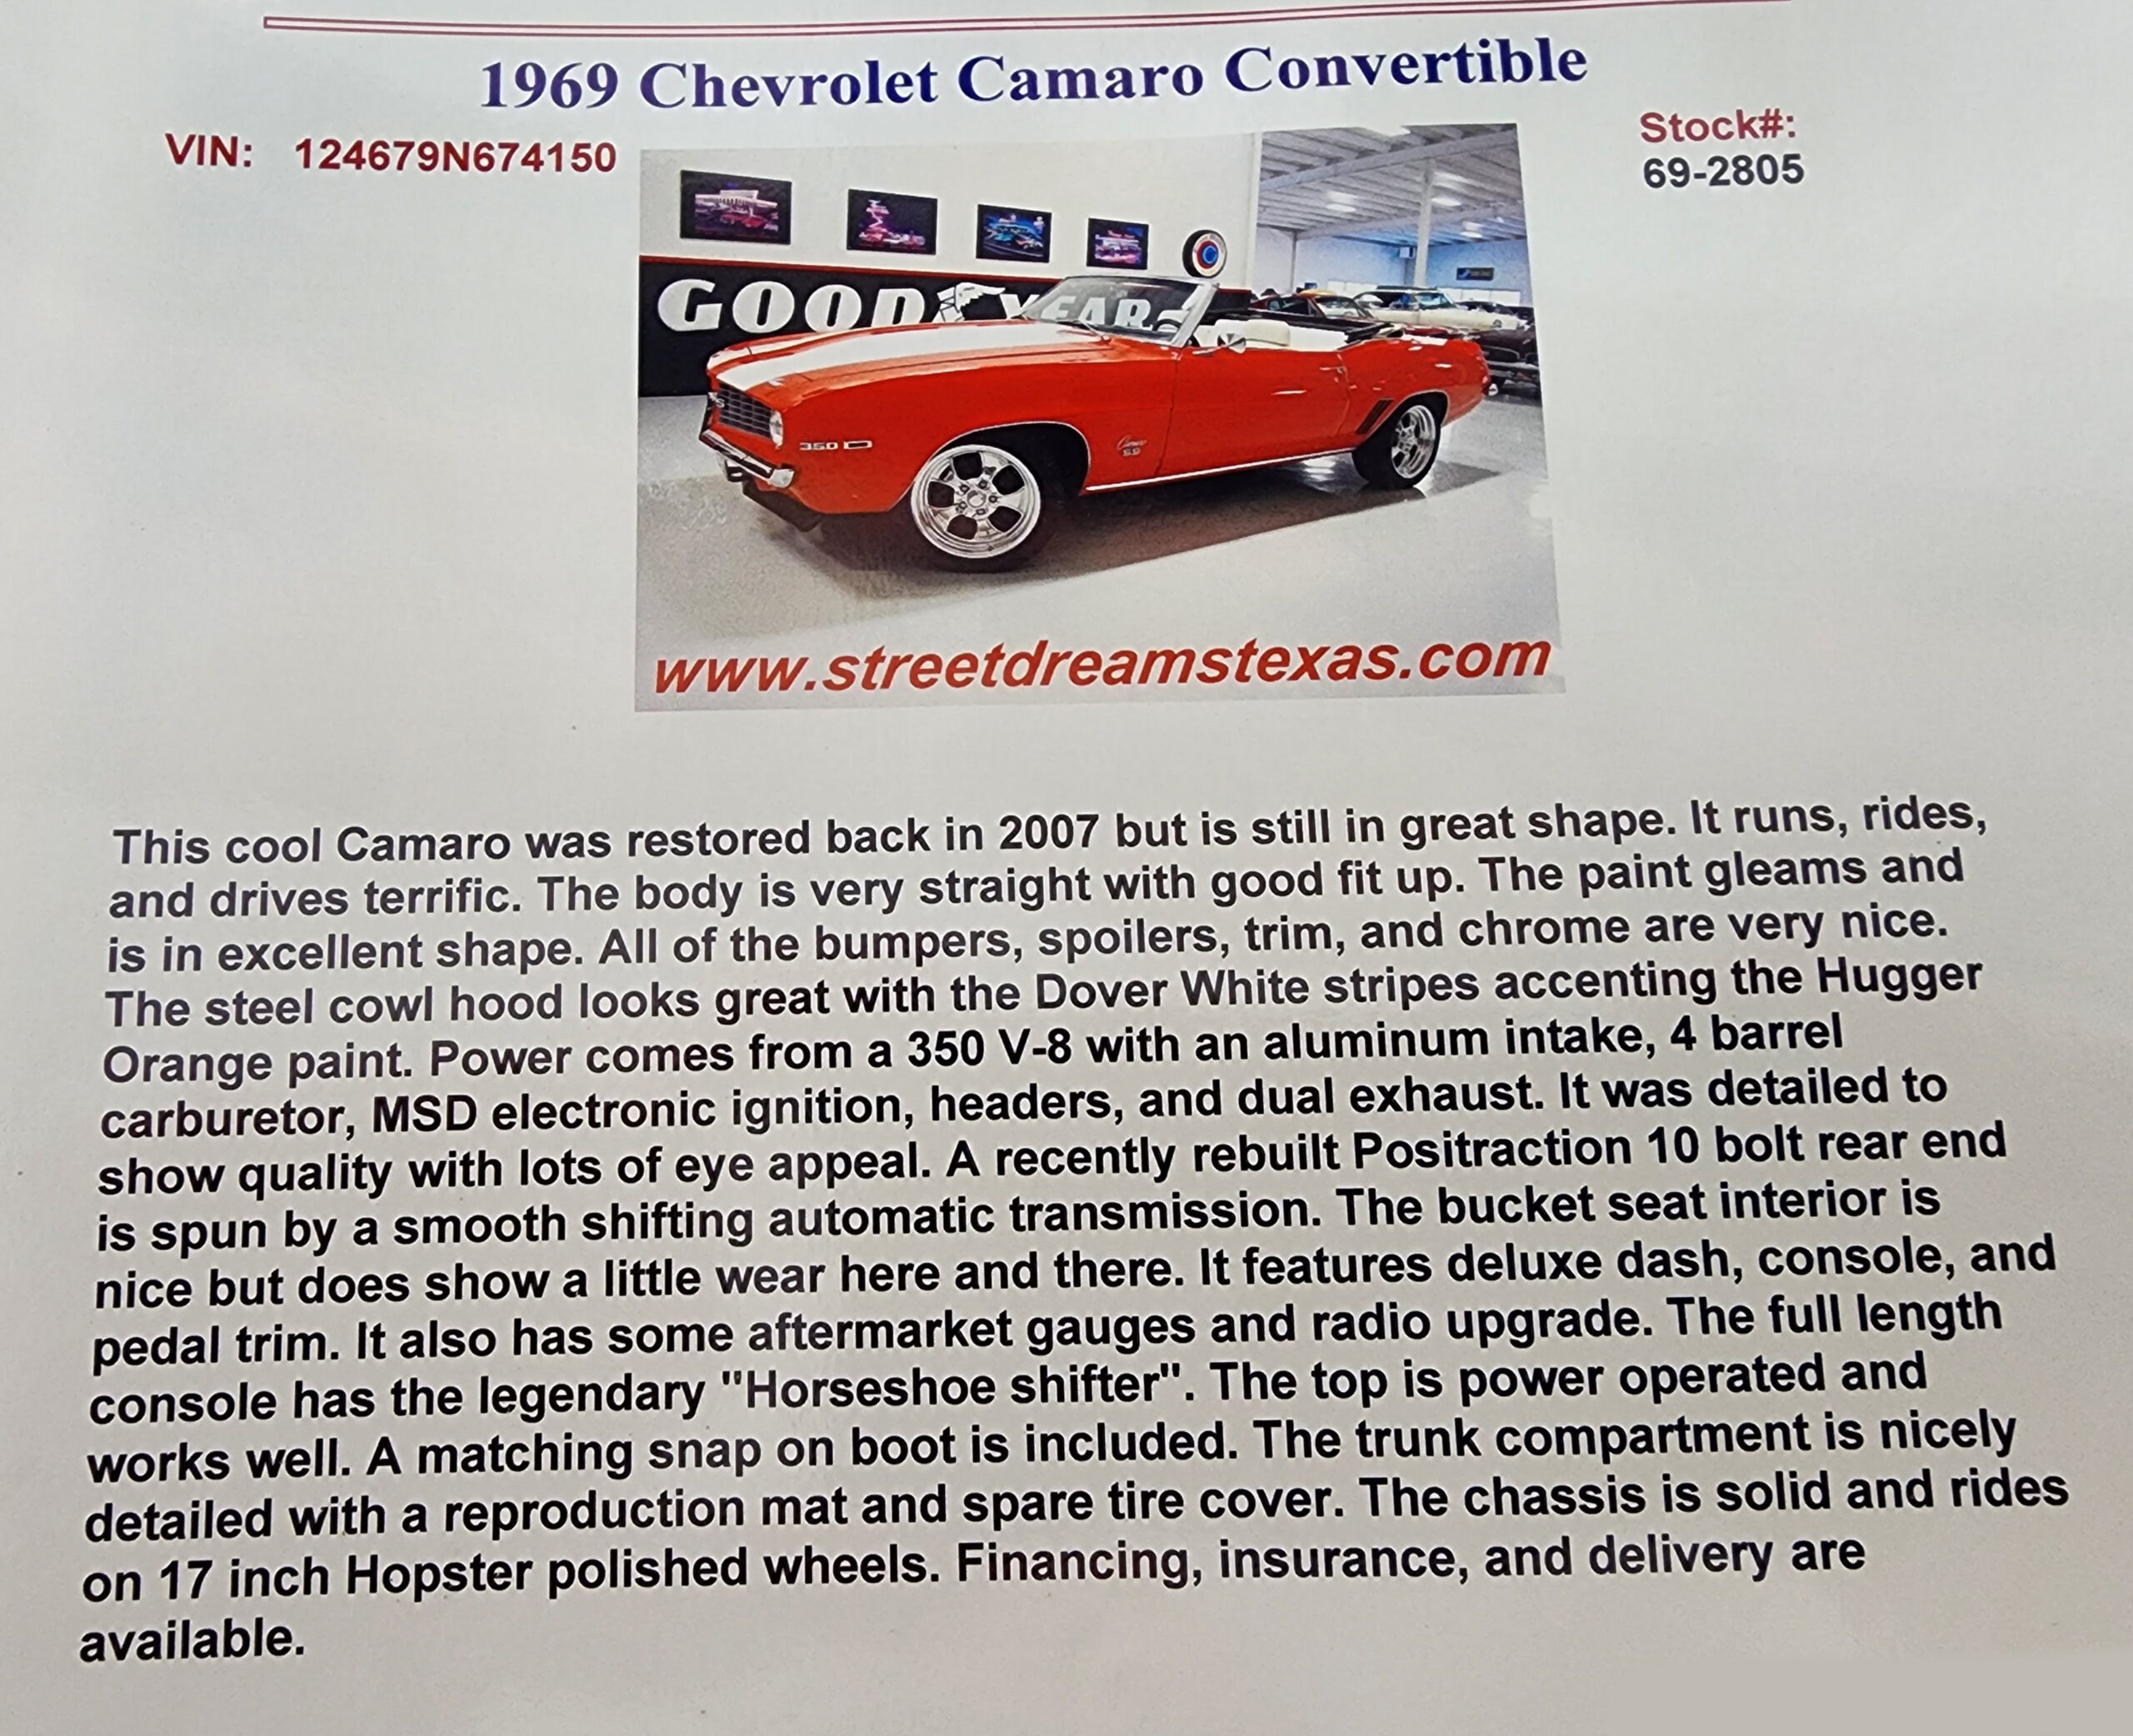 1969 Chevrolet Camaro Convertible with an orange paint job in a showroom. Description highlights restoration, engine specs, and features, including power steering and a custom Hurst shifter.